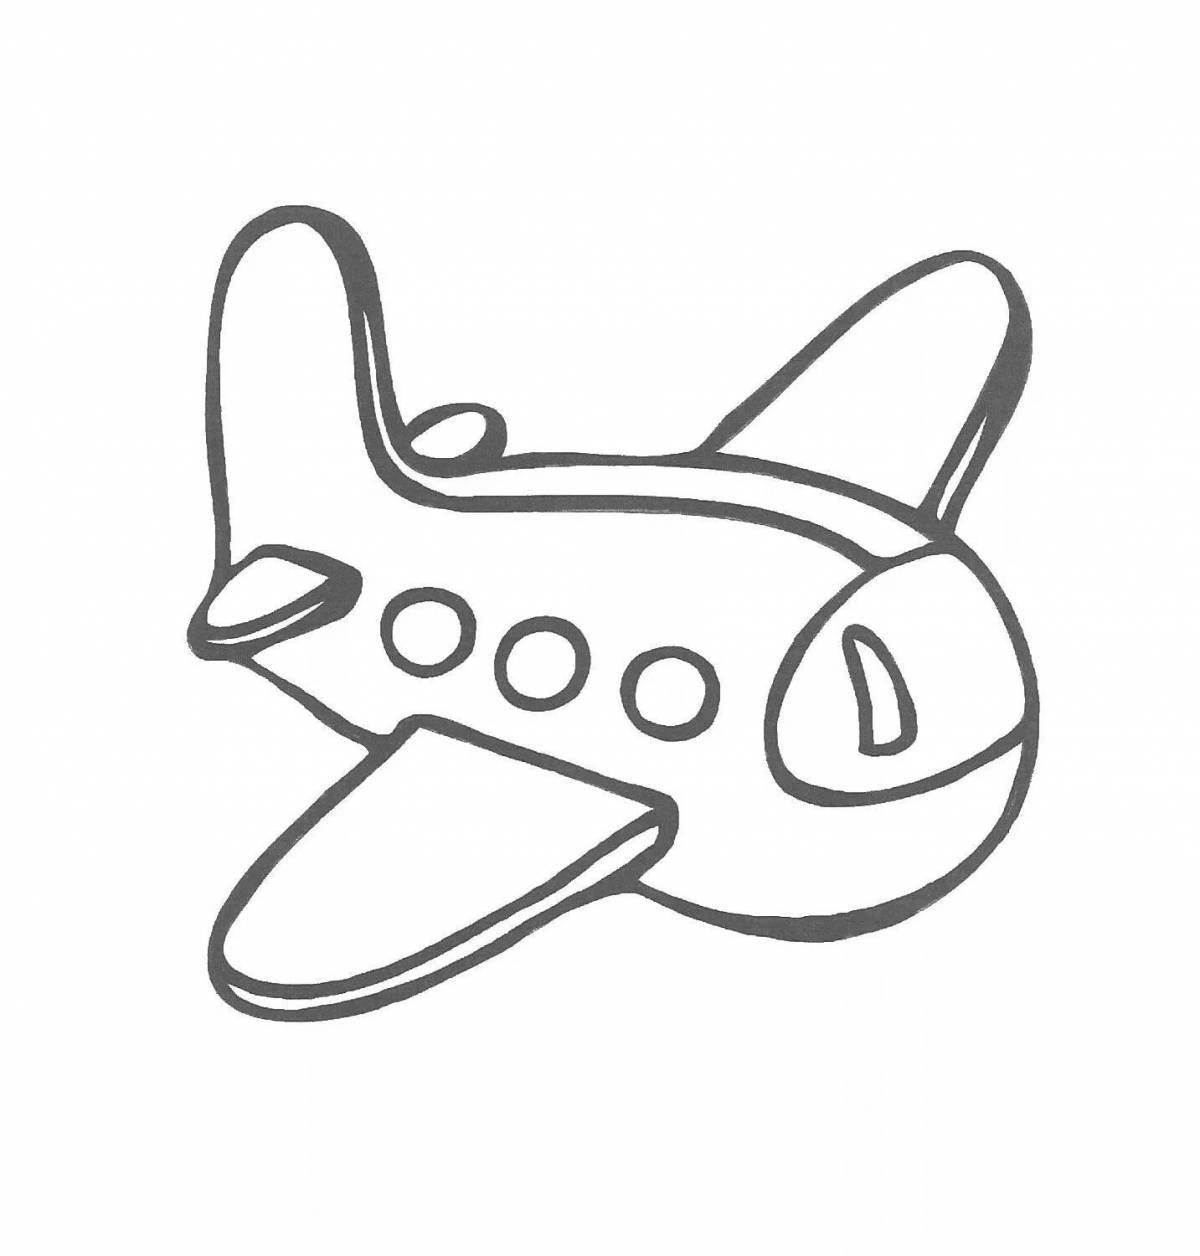 Fun plane coloring page for kids